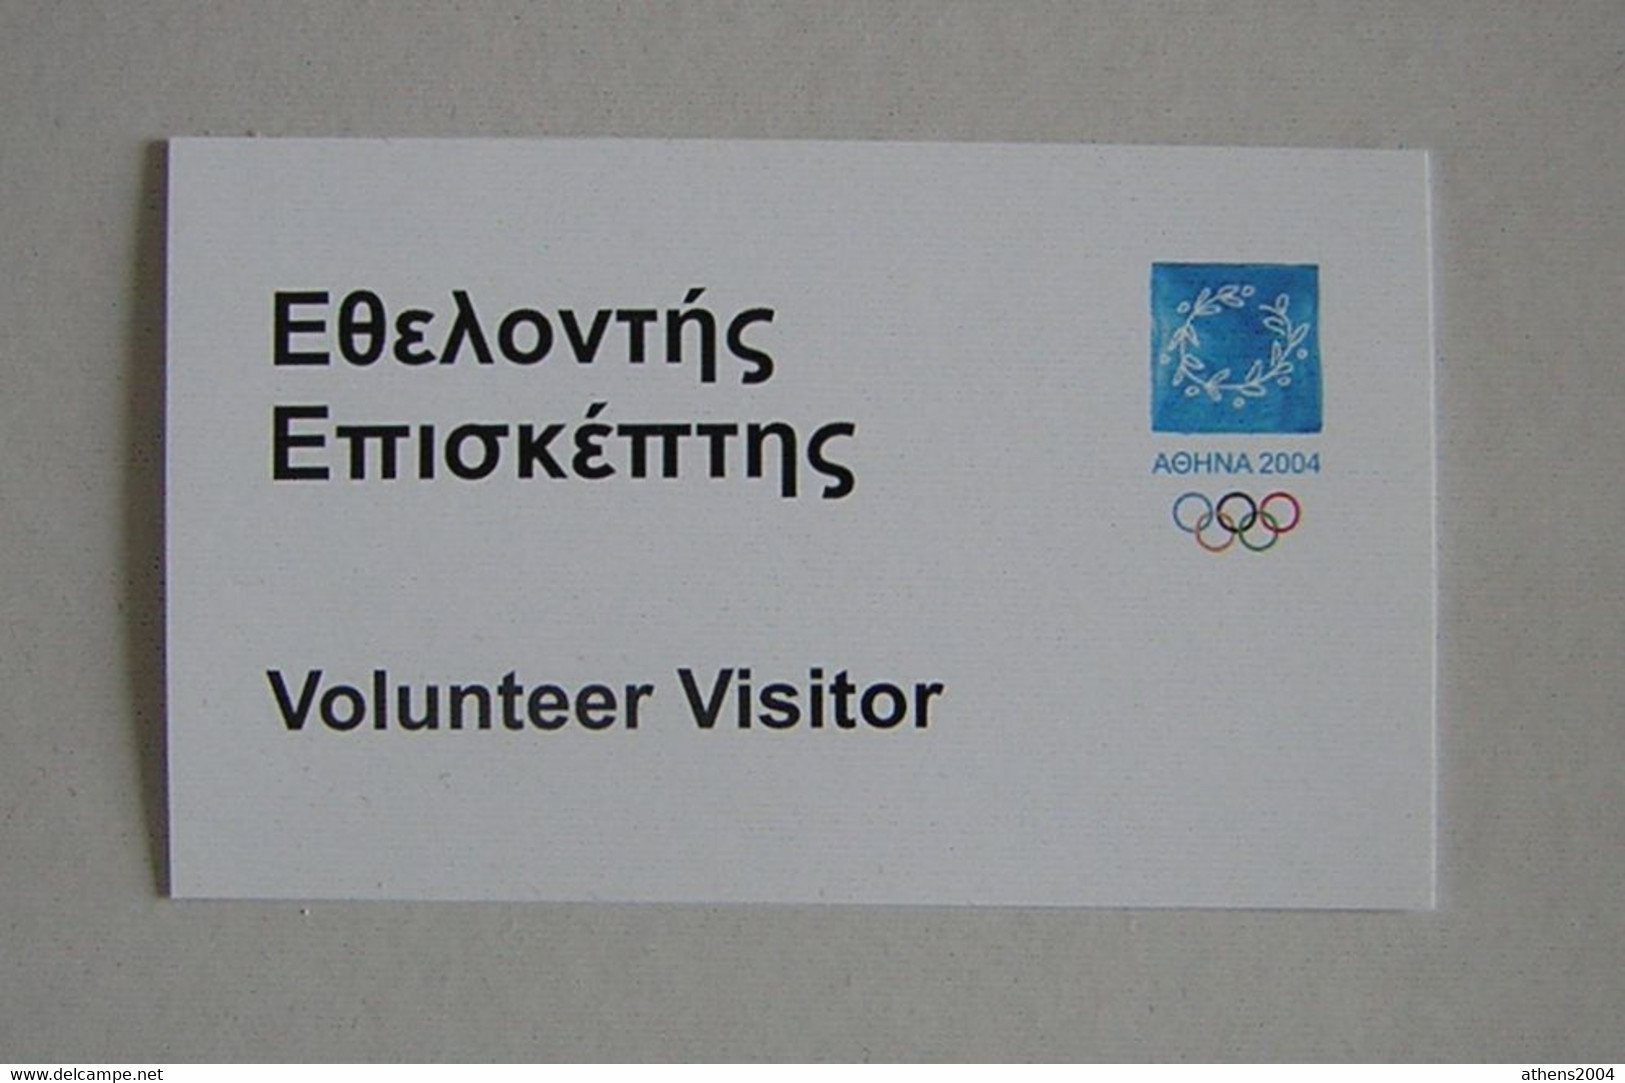 Athens 2004 Olympic Games - Accreditation Volunteer Visitor - Apparel, Souvenirs & Other